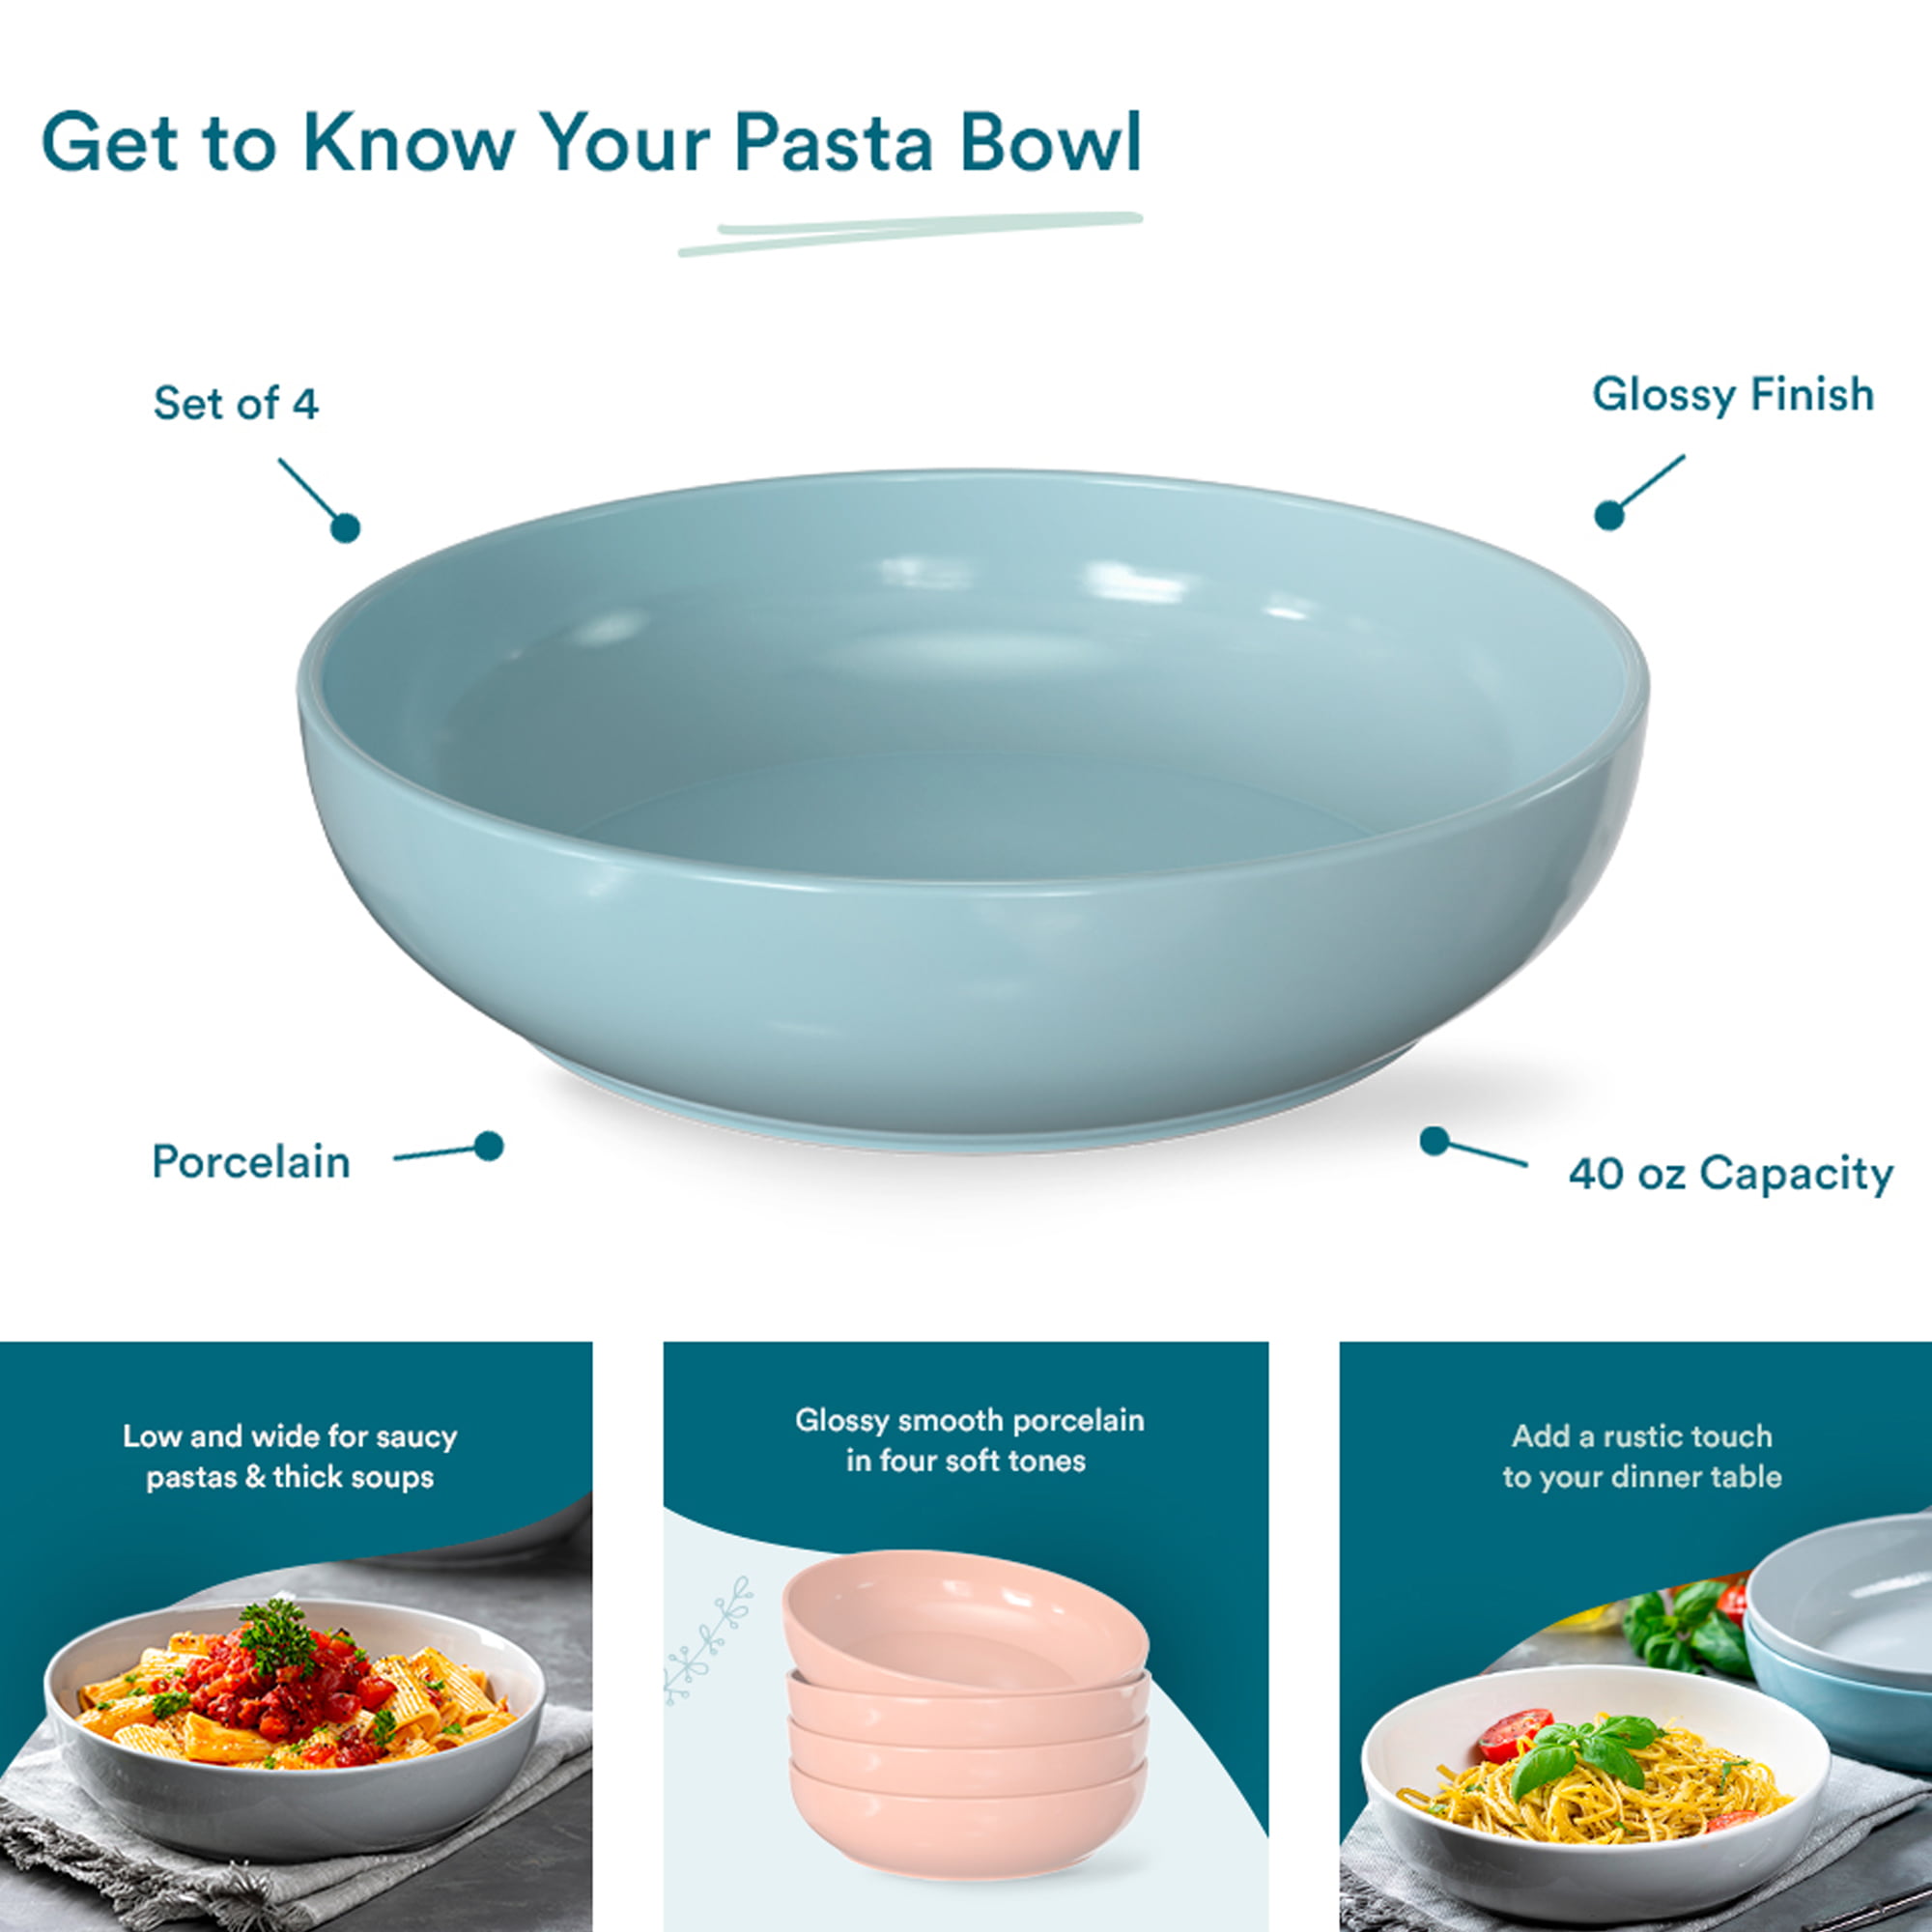 Deep Ceramic Mixing Bowl With Handle and Spout, Modern Light Blue Stoneware  Pasta Bowl 